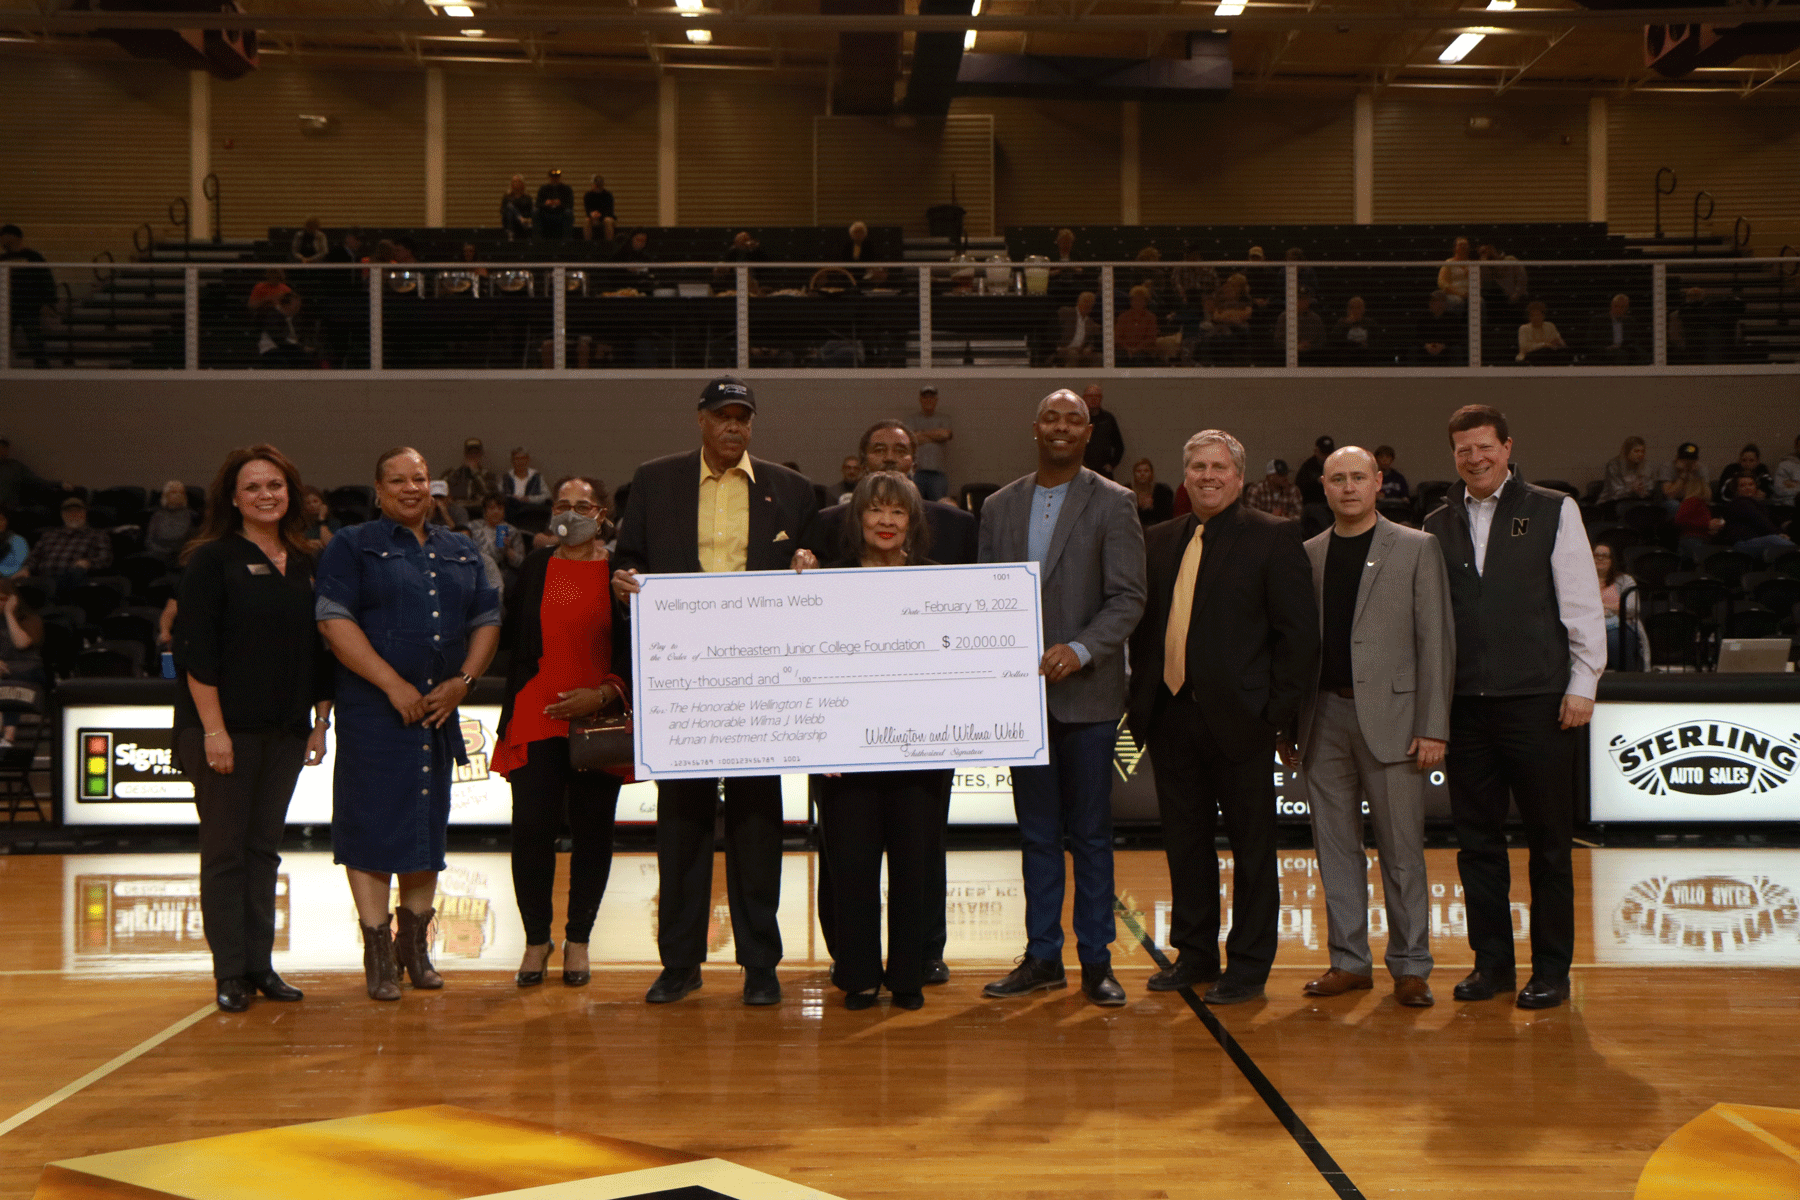 Mayor Wellington Webb and First-Lady and former State Representative Wilma J. Webb, along with their family members son Anthony Webb, daughter-in-law Rosemary Webb, daughter Stephanie Omalley and grandson Allen Webb, presented a $20,000 donation to the NJC Foundation Saturday, Feb. 19, 2022, during Northeastern’s Hoops Homecoming basketball games